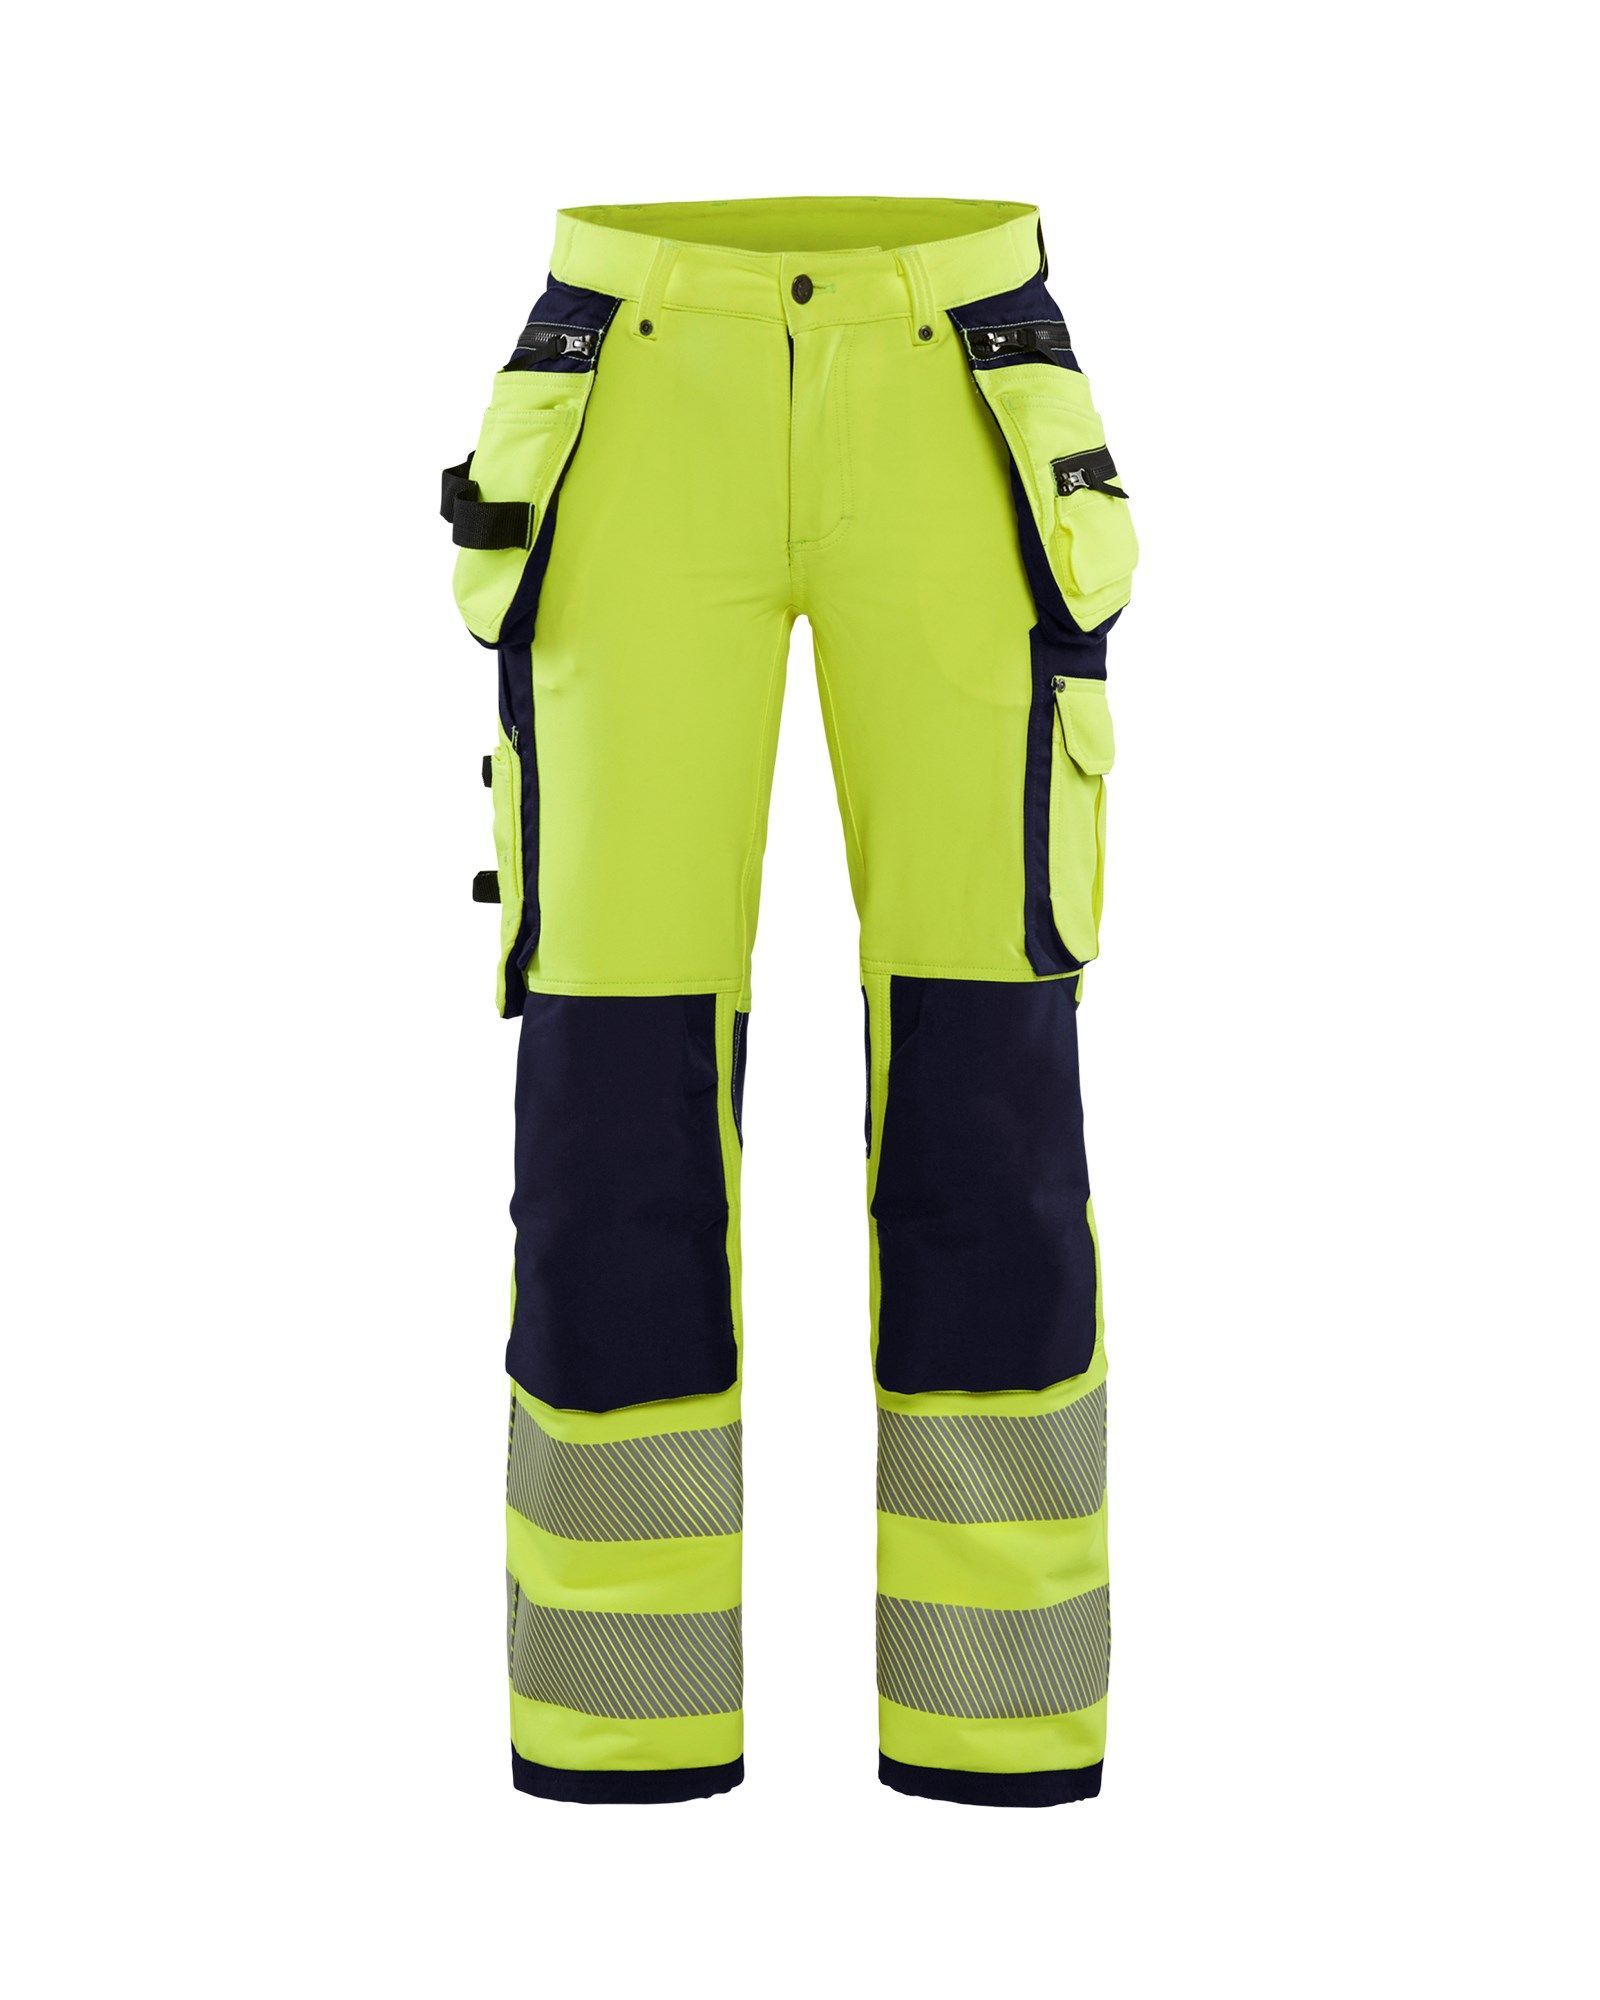 Hi-vis skirts now available